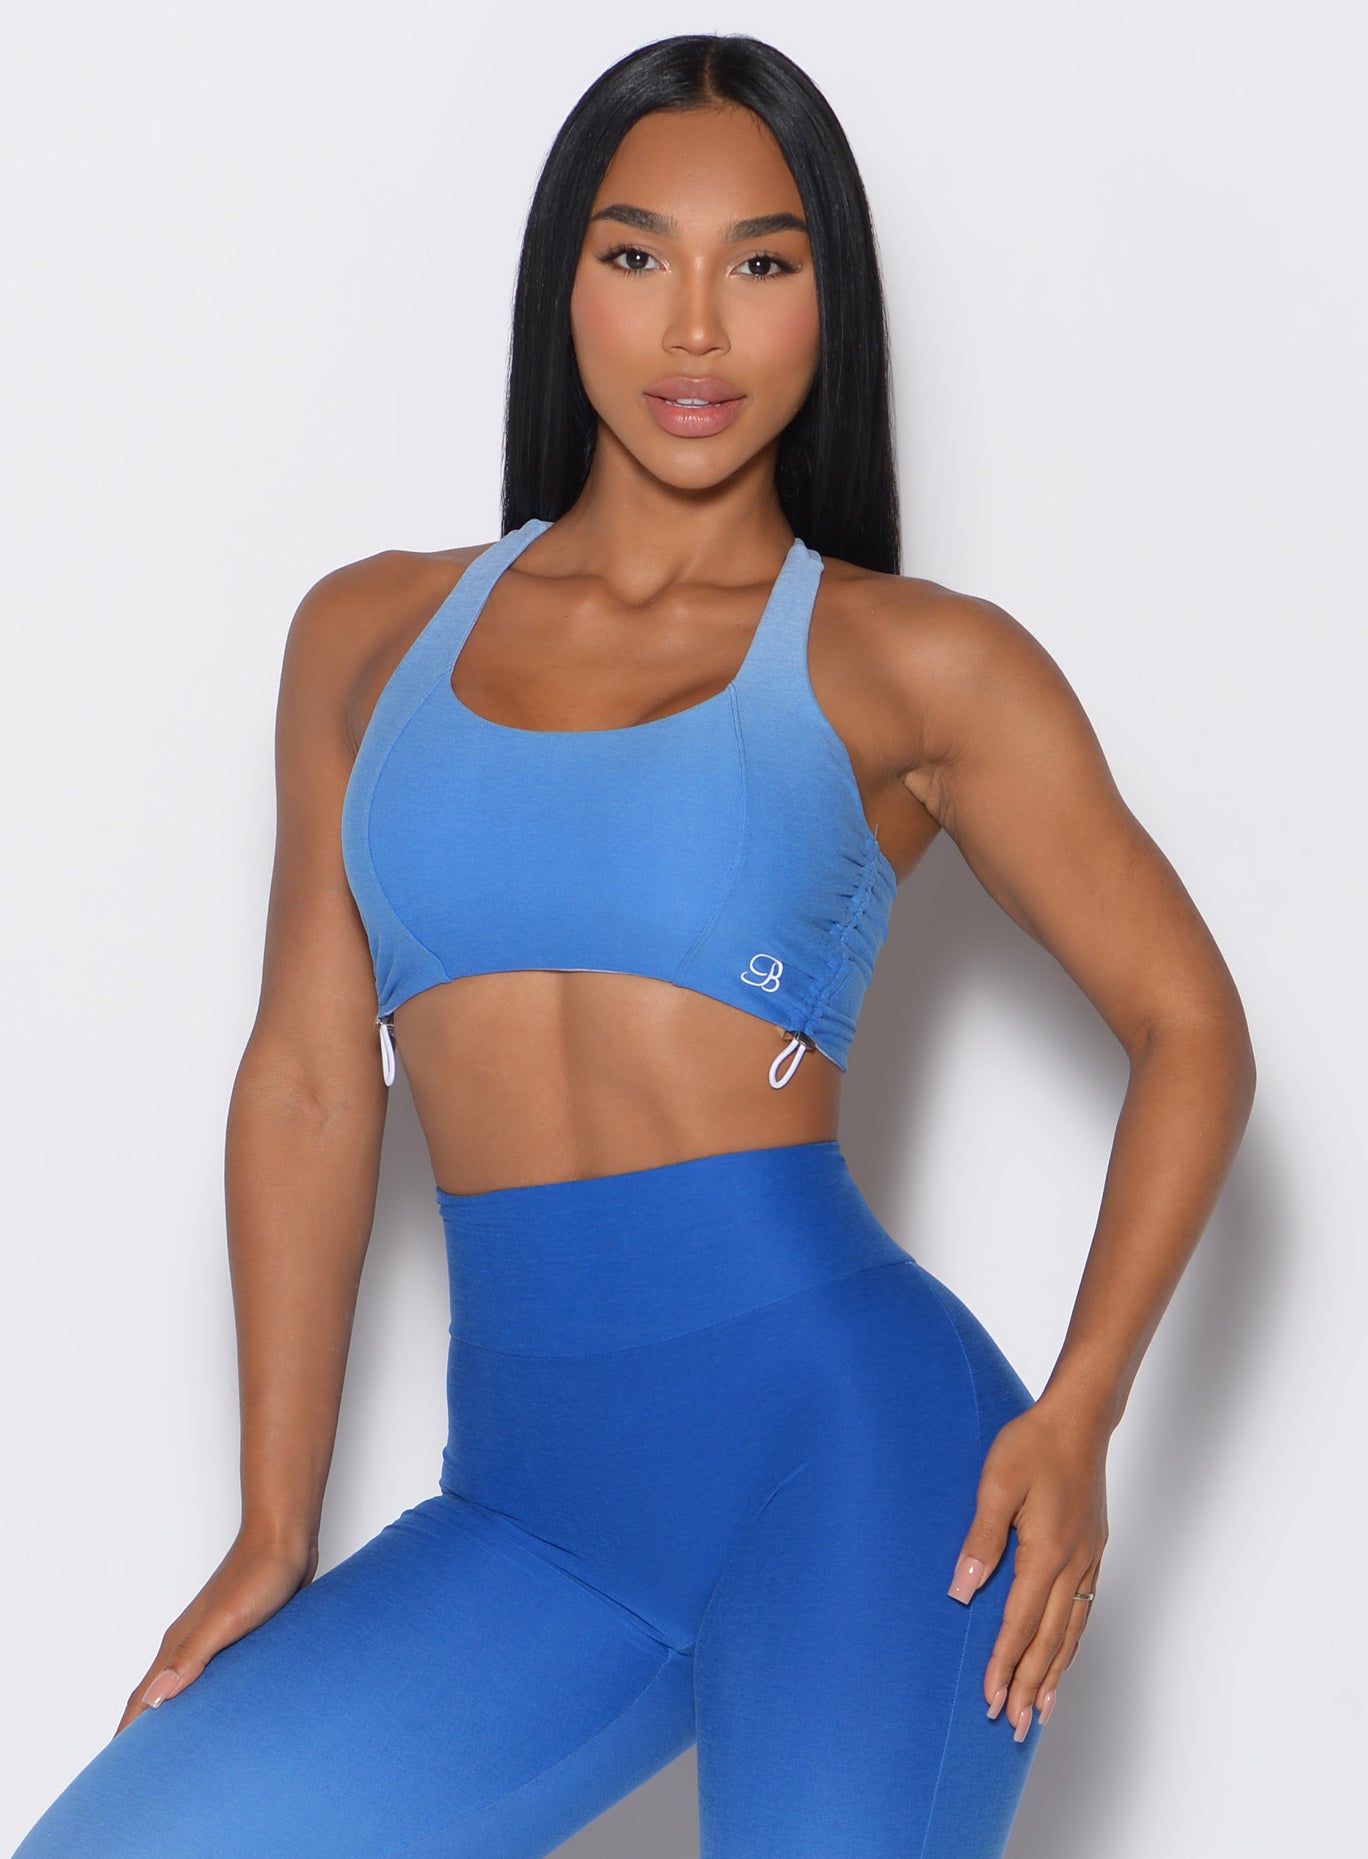 front profile view of a model wearing our toggle sports bra in Ombre Blue Crush color complemented with the matching toggle leggings